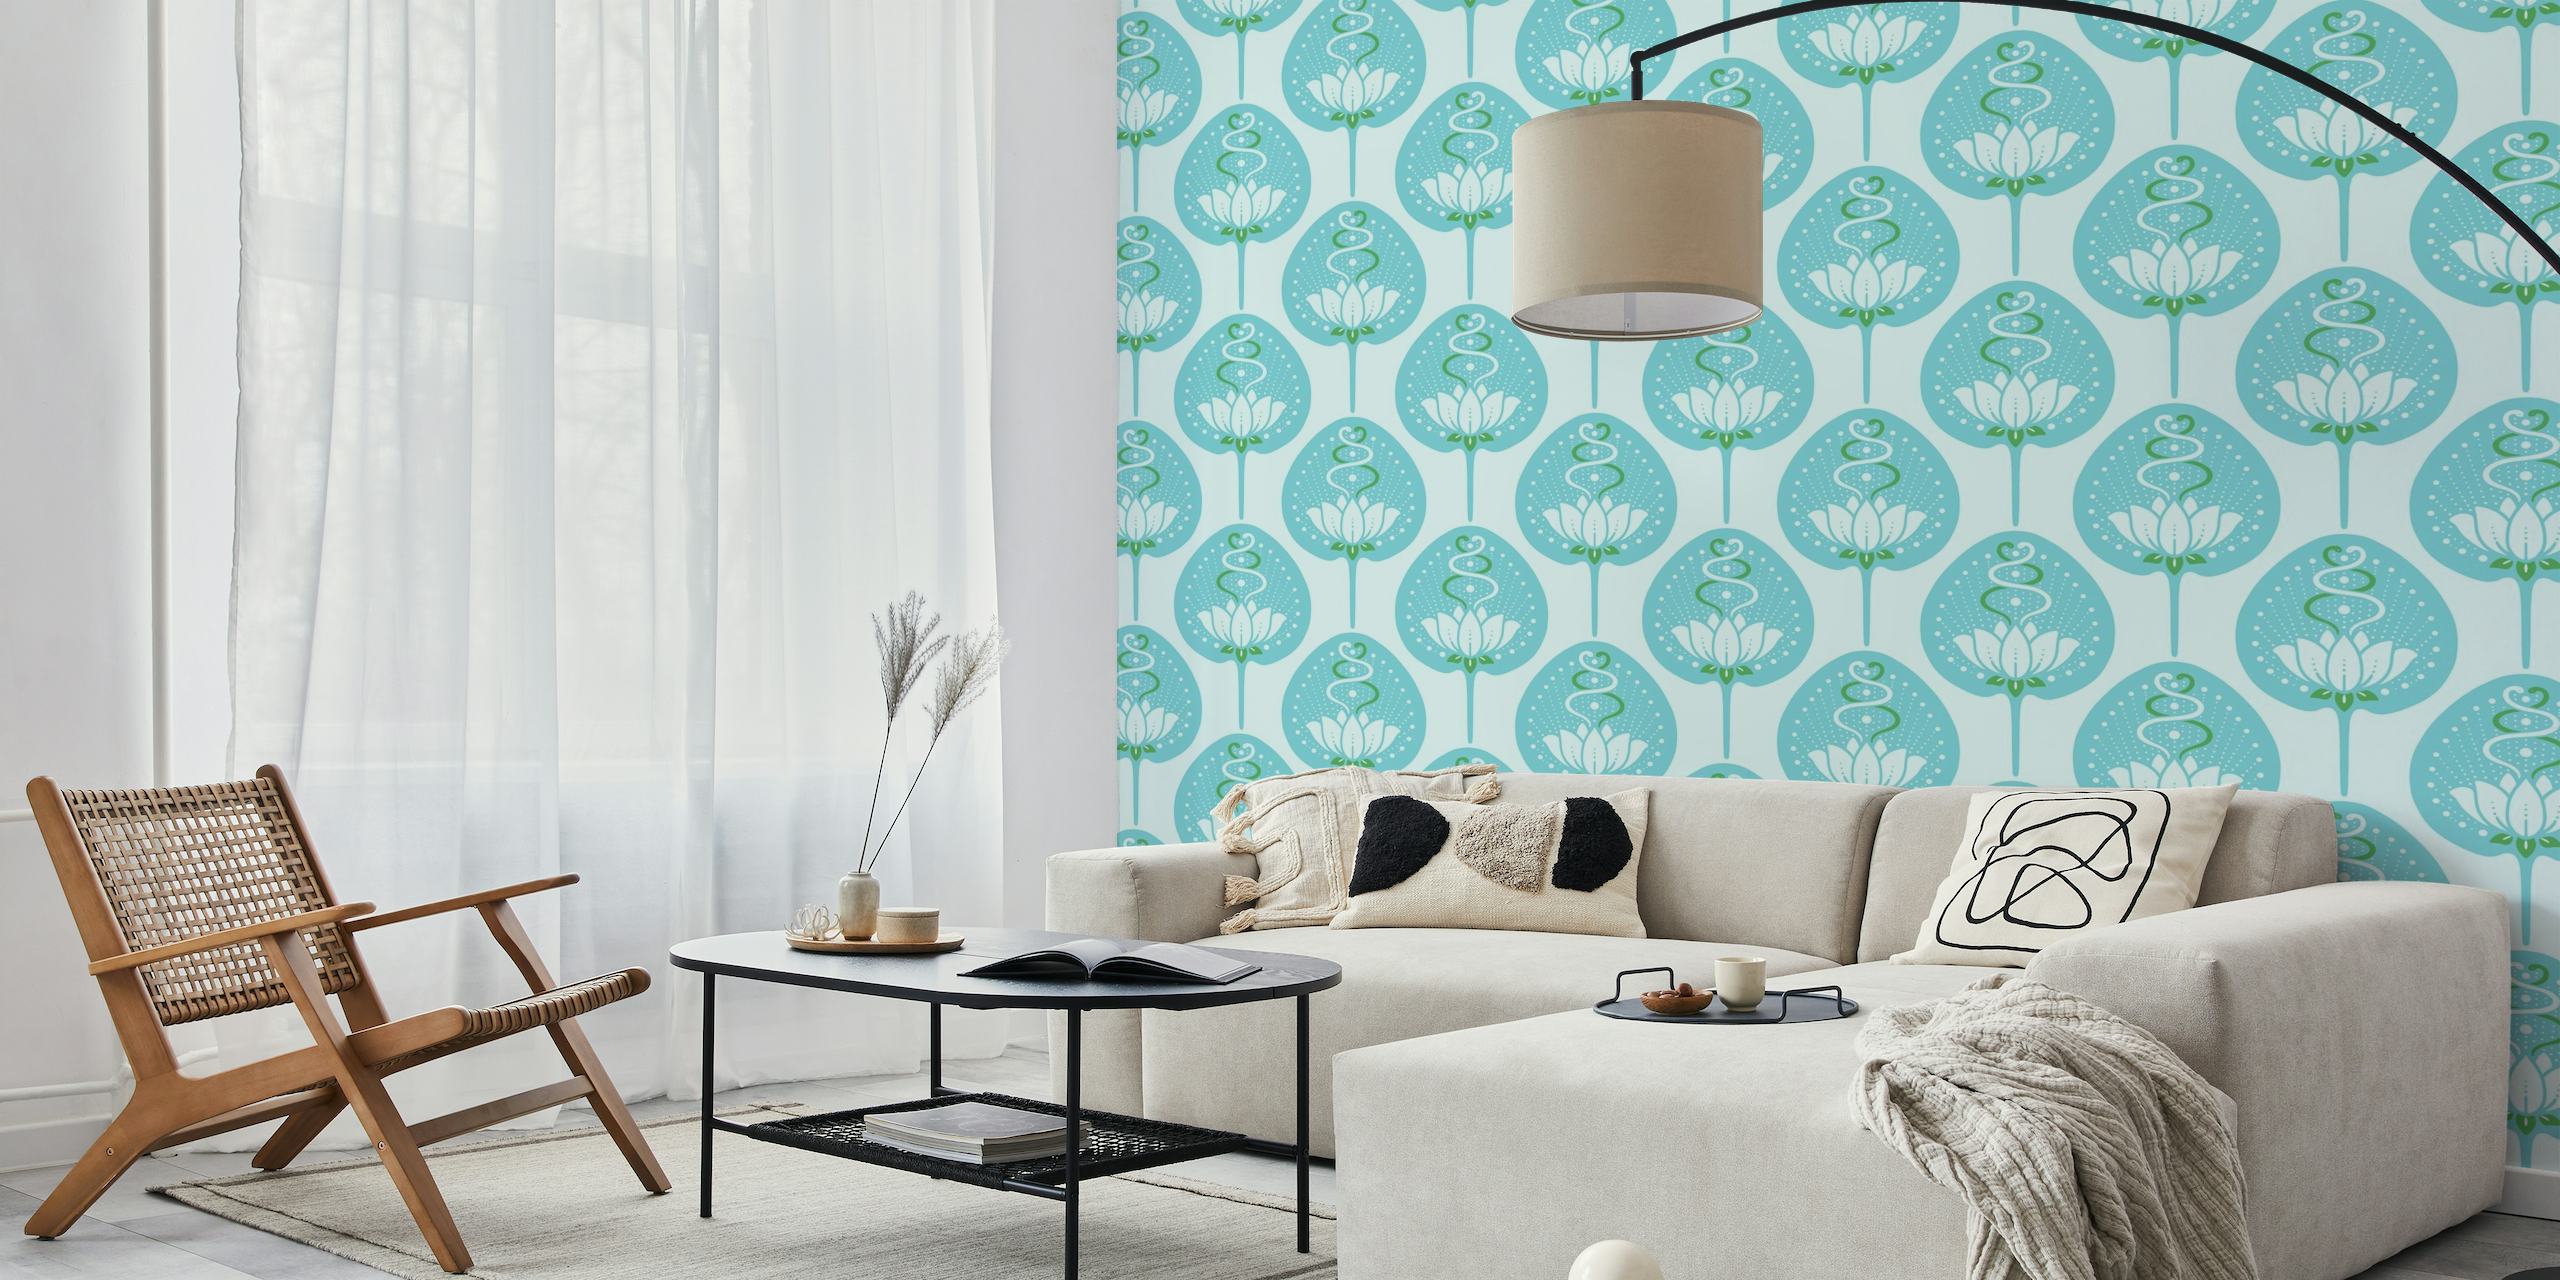 A serene blue wall mural featuring a pattern of blooming lotus flowers intertwined with graceful snakes